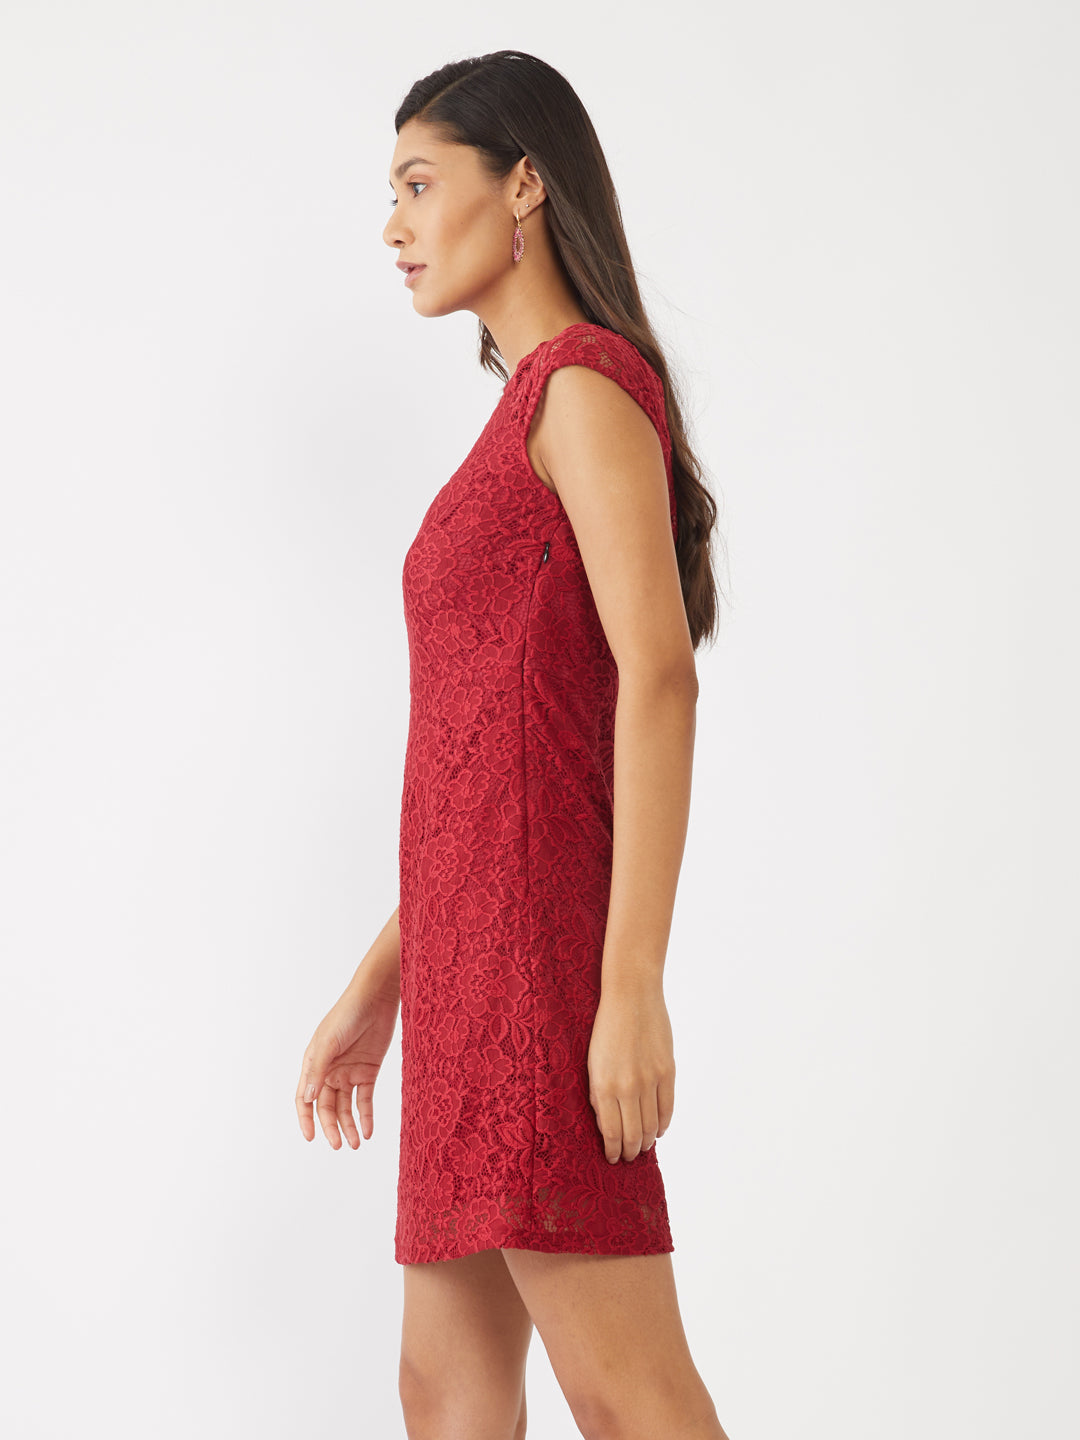 Red Lace Short Dress For Women